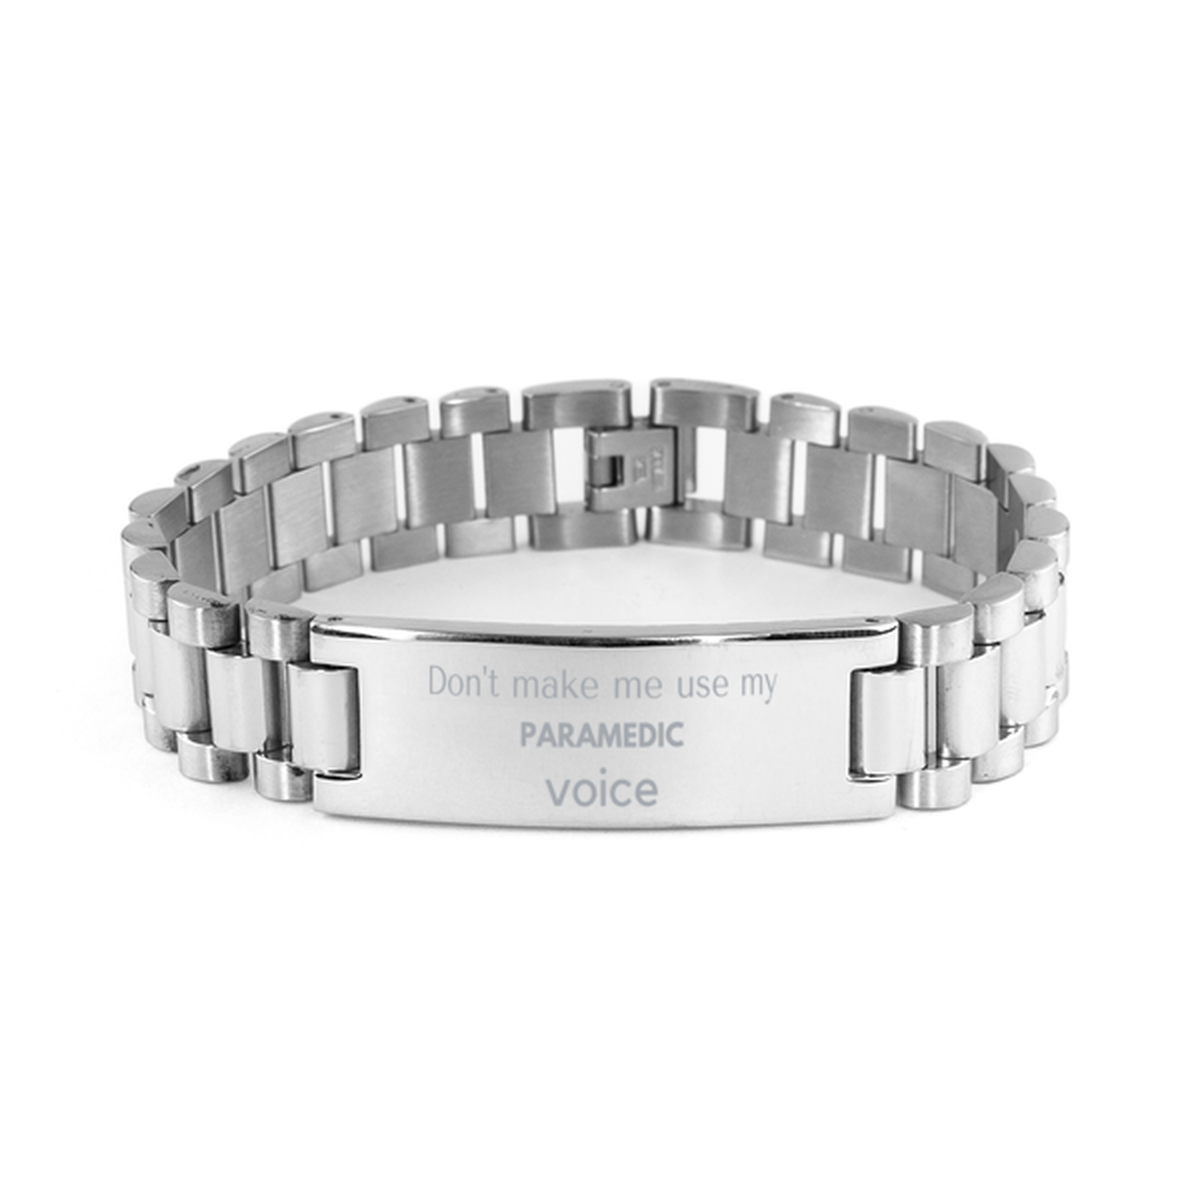 Don't make me use my Paramedic voice, Sarcasm Paramedic Gifts, Christmas Paramedic Ladder Stainless Steel Bracelet Birthday Unique Gifts For Paramedic Coworkers, Men, Women, Colleague, Friends